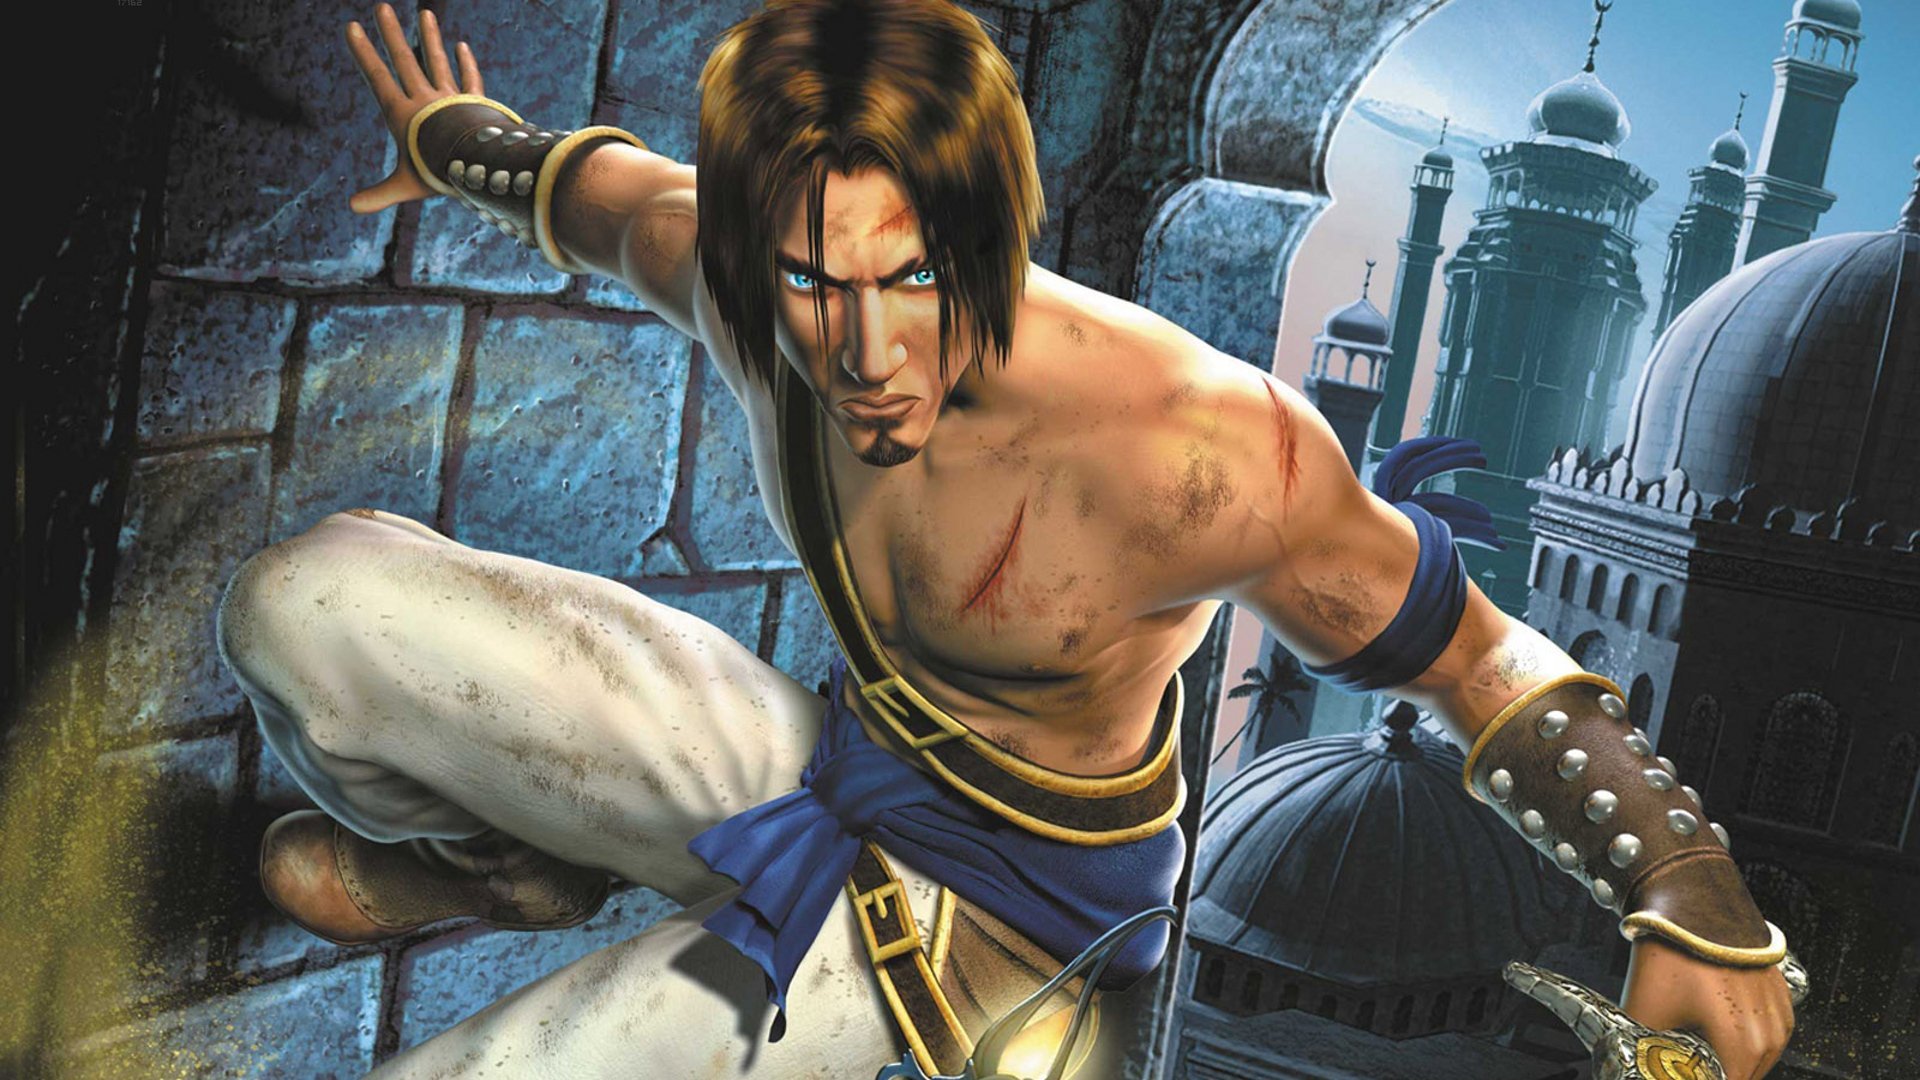 Prince of Persia remake rumor appears online ahead of Ubisoft Forward September event